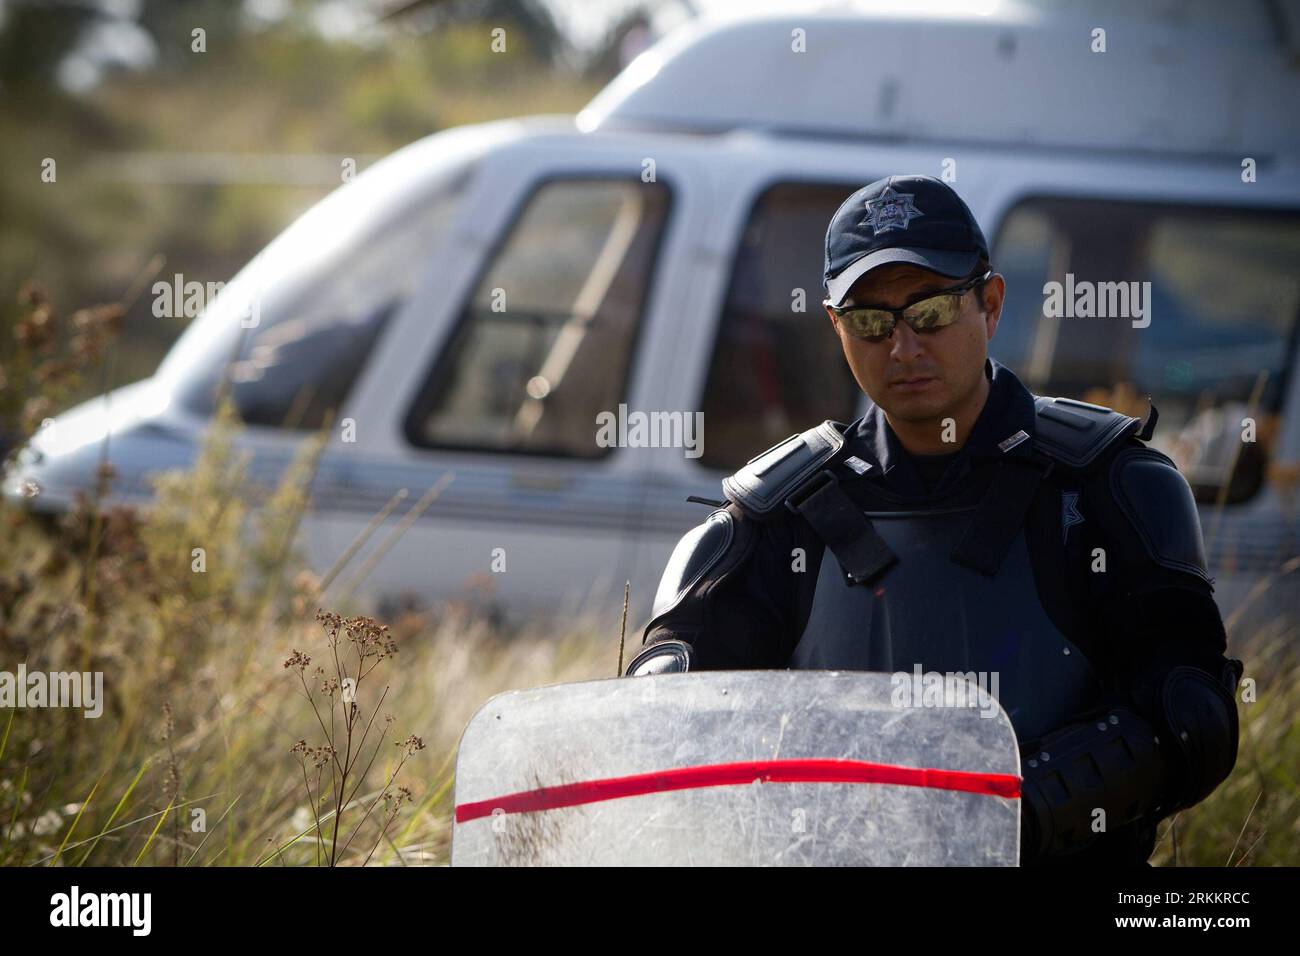 Bildnummer: 56273051  Datum: 11.11.2011  Copyright: imago/Xinhua (111112) -- CHALCO, Nov. 12, 2011 (Xinhua) -- A police officer guards the site where the helicopter carrying Mexican Interior Minister Francisco Blake Mora crashed, in the municipality of Chalco, State of Mexico, Mexico, on Nov. 11, 2011. Mexican Interior Minister Francisco Blake Mora and Vice Interior Minister Felipe Zamora were killed in a helicopter crash on Friday, official sources said. (Xinhua/Pedro Mera) (zf) MEXICO-INTERIOR MINISTER-FRANCISCO BLAKE MORA-DEATH PUBLICATIONxNOTxINxCHN People Politik Absturz Hubschrauberabstu Stock Photo